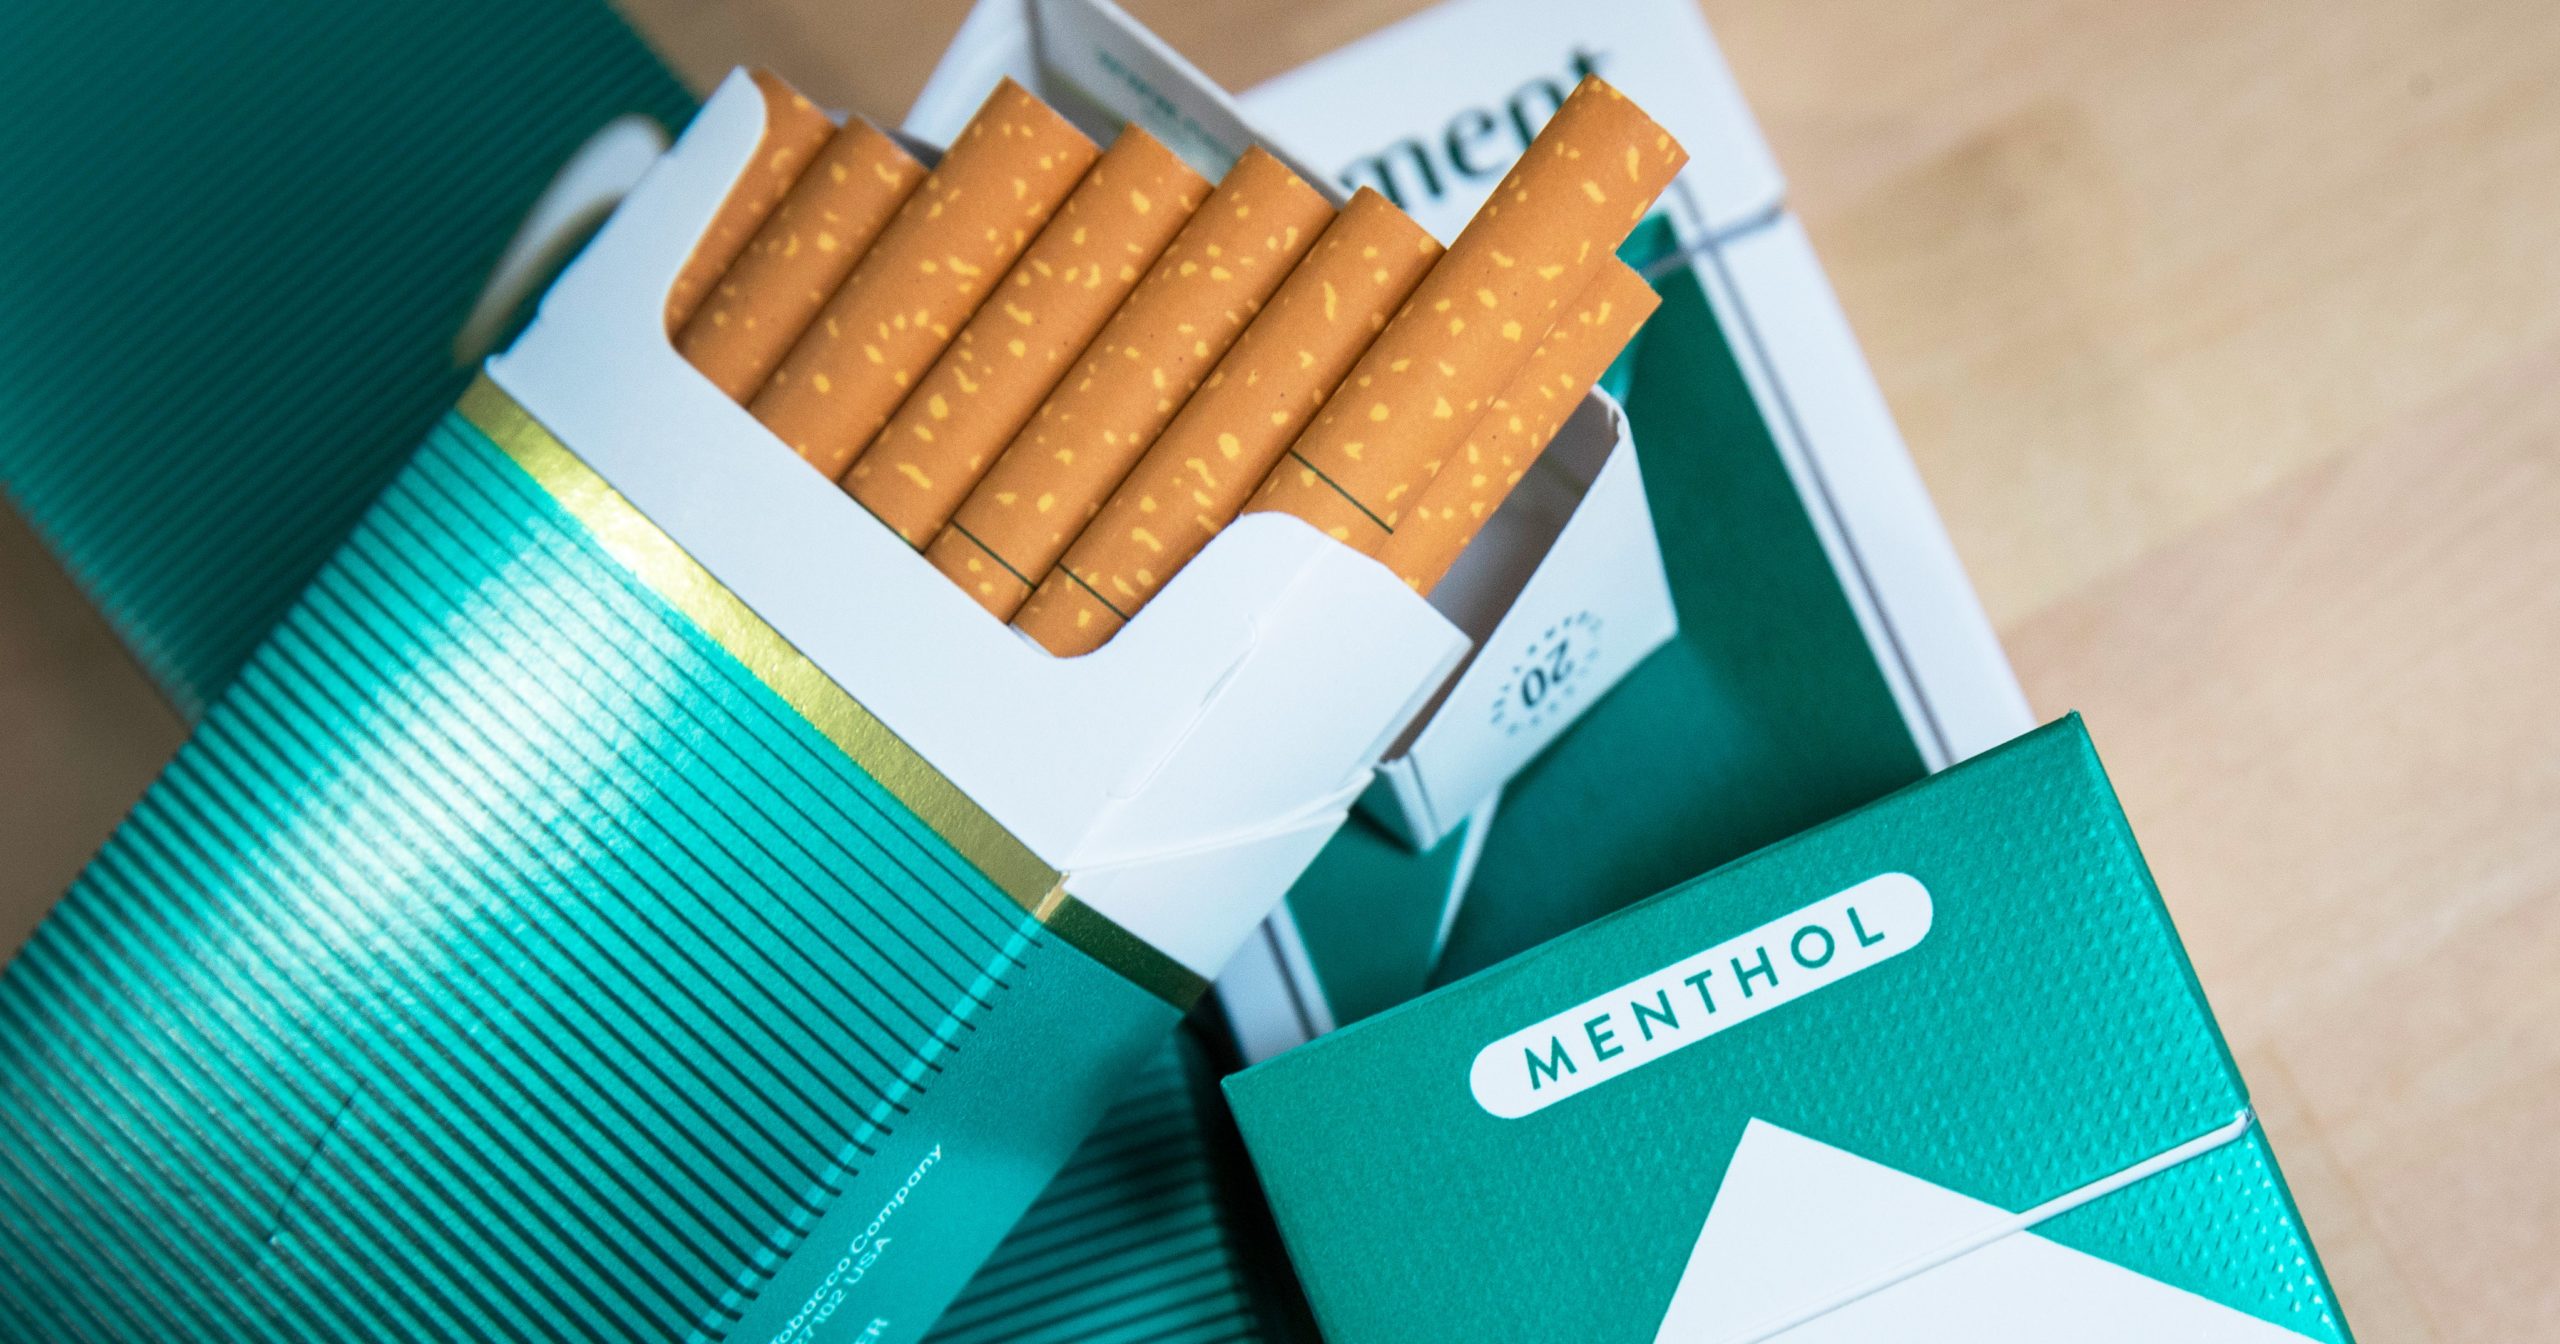 Tasty News Fda To Ban Menthol Cigarettes And Flavored Cigars Salud America